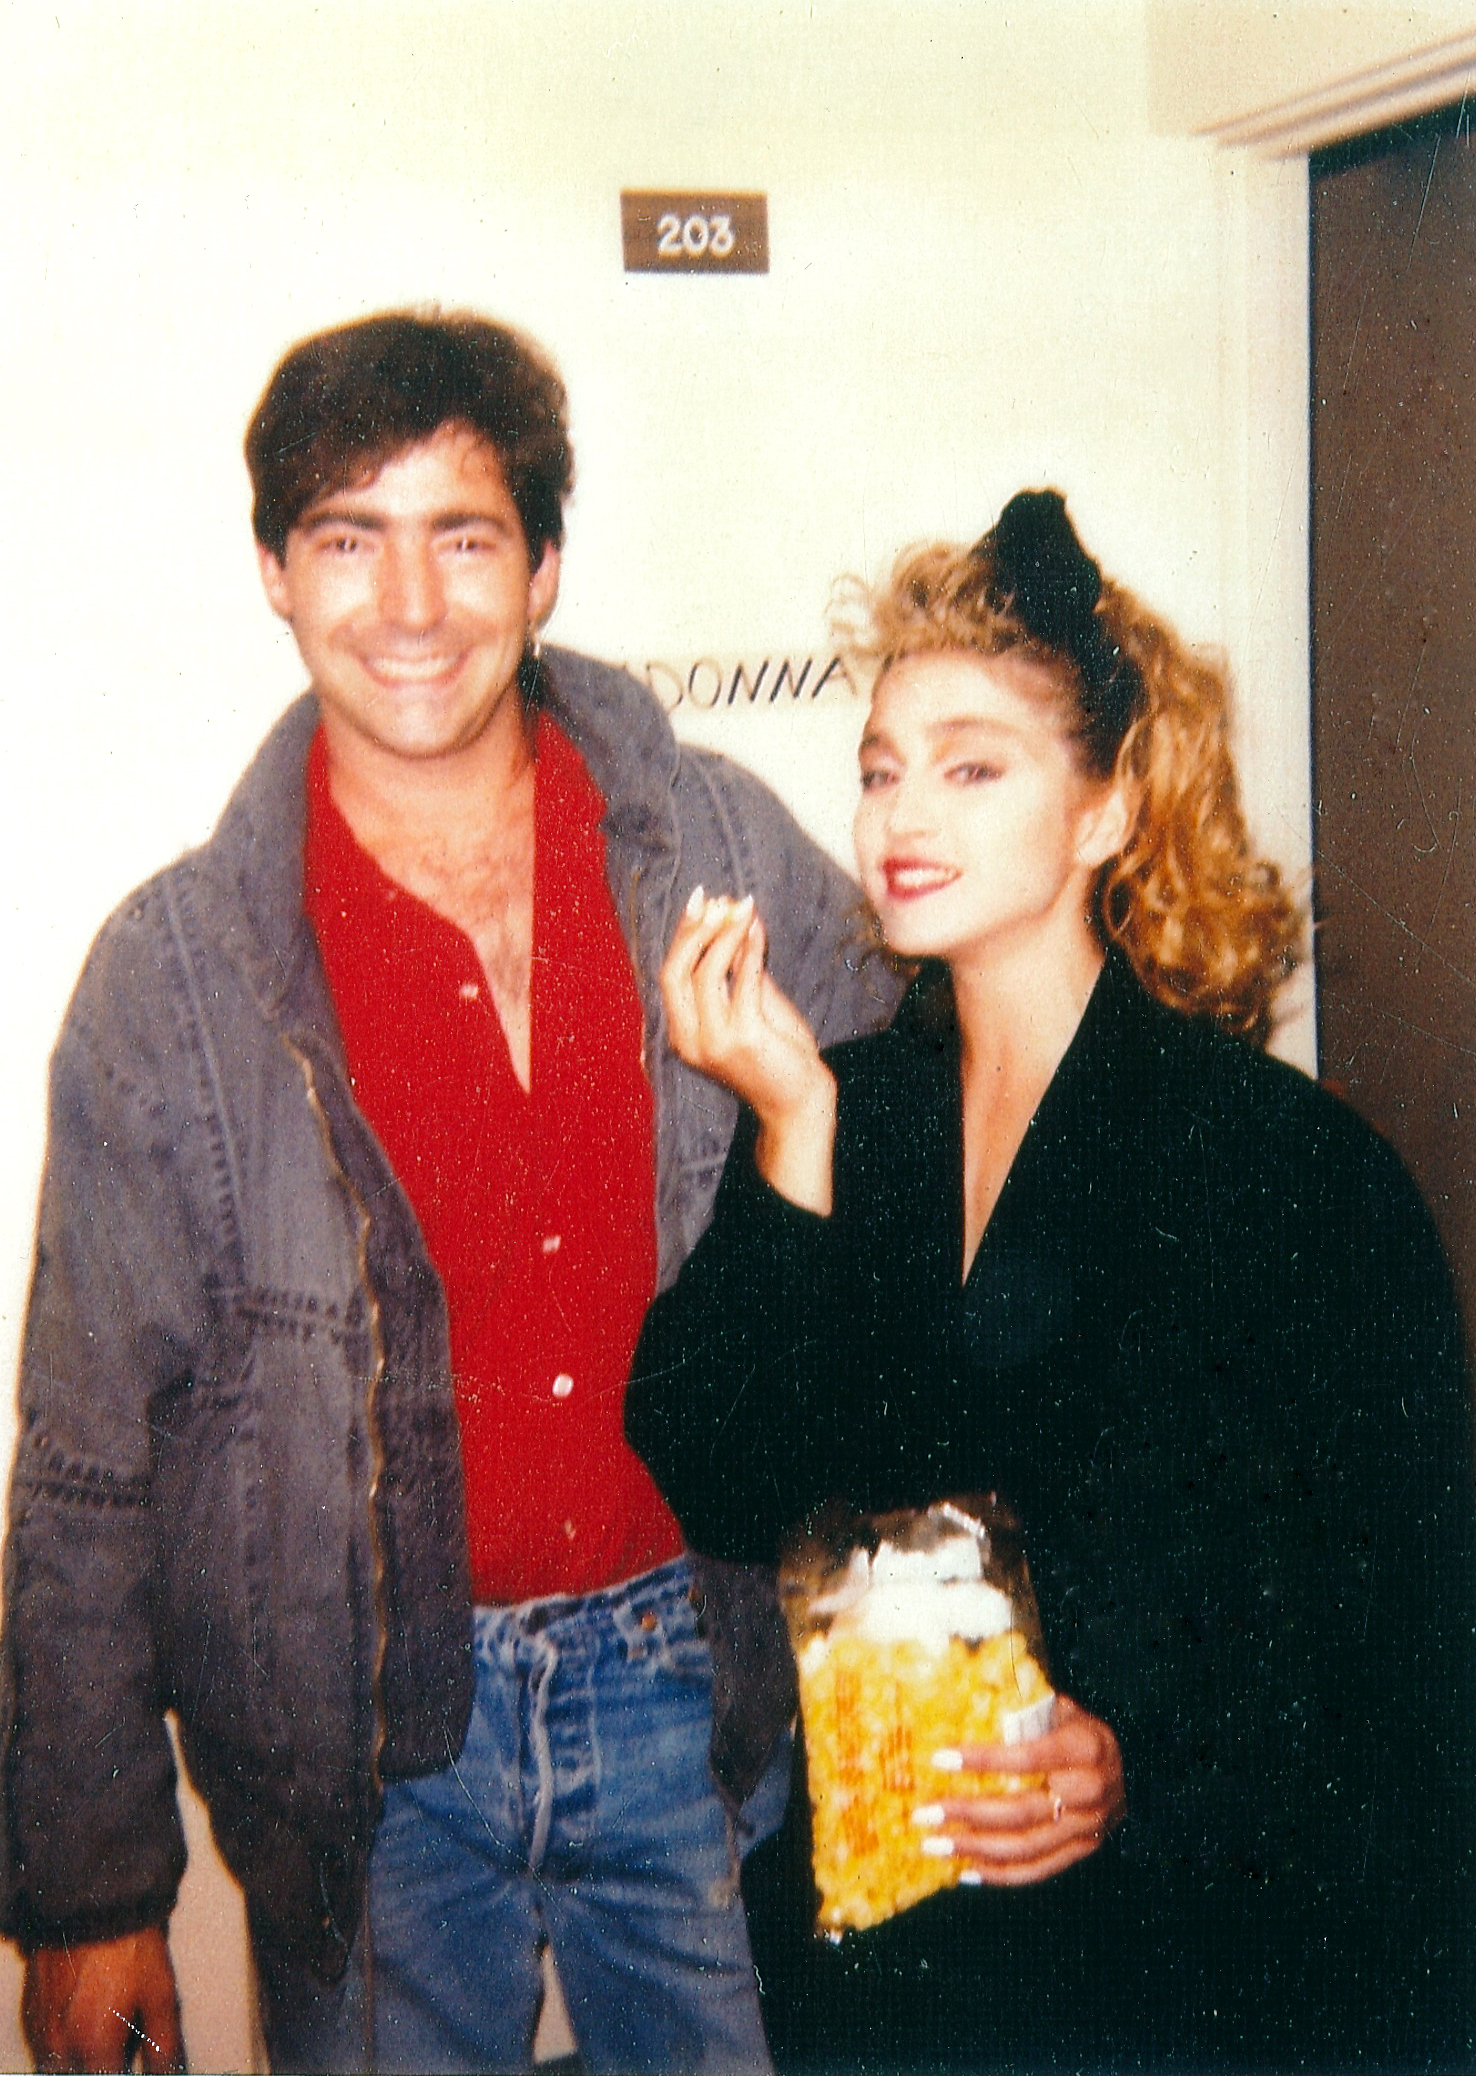 Madonna & Me eating popcorn in her dressing room. I also played a small part on Material Girl video. I'm the one with the wastepaper basket. We worked on several things including 